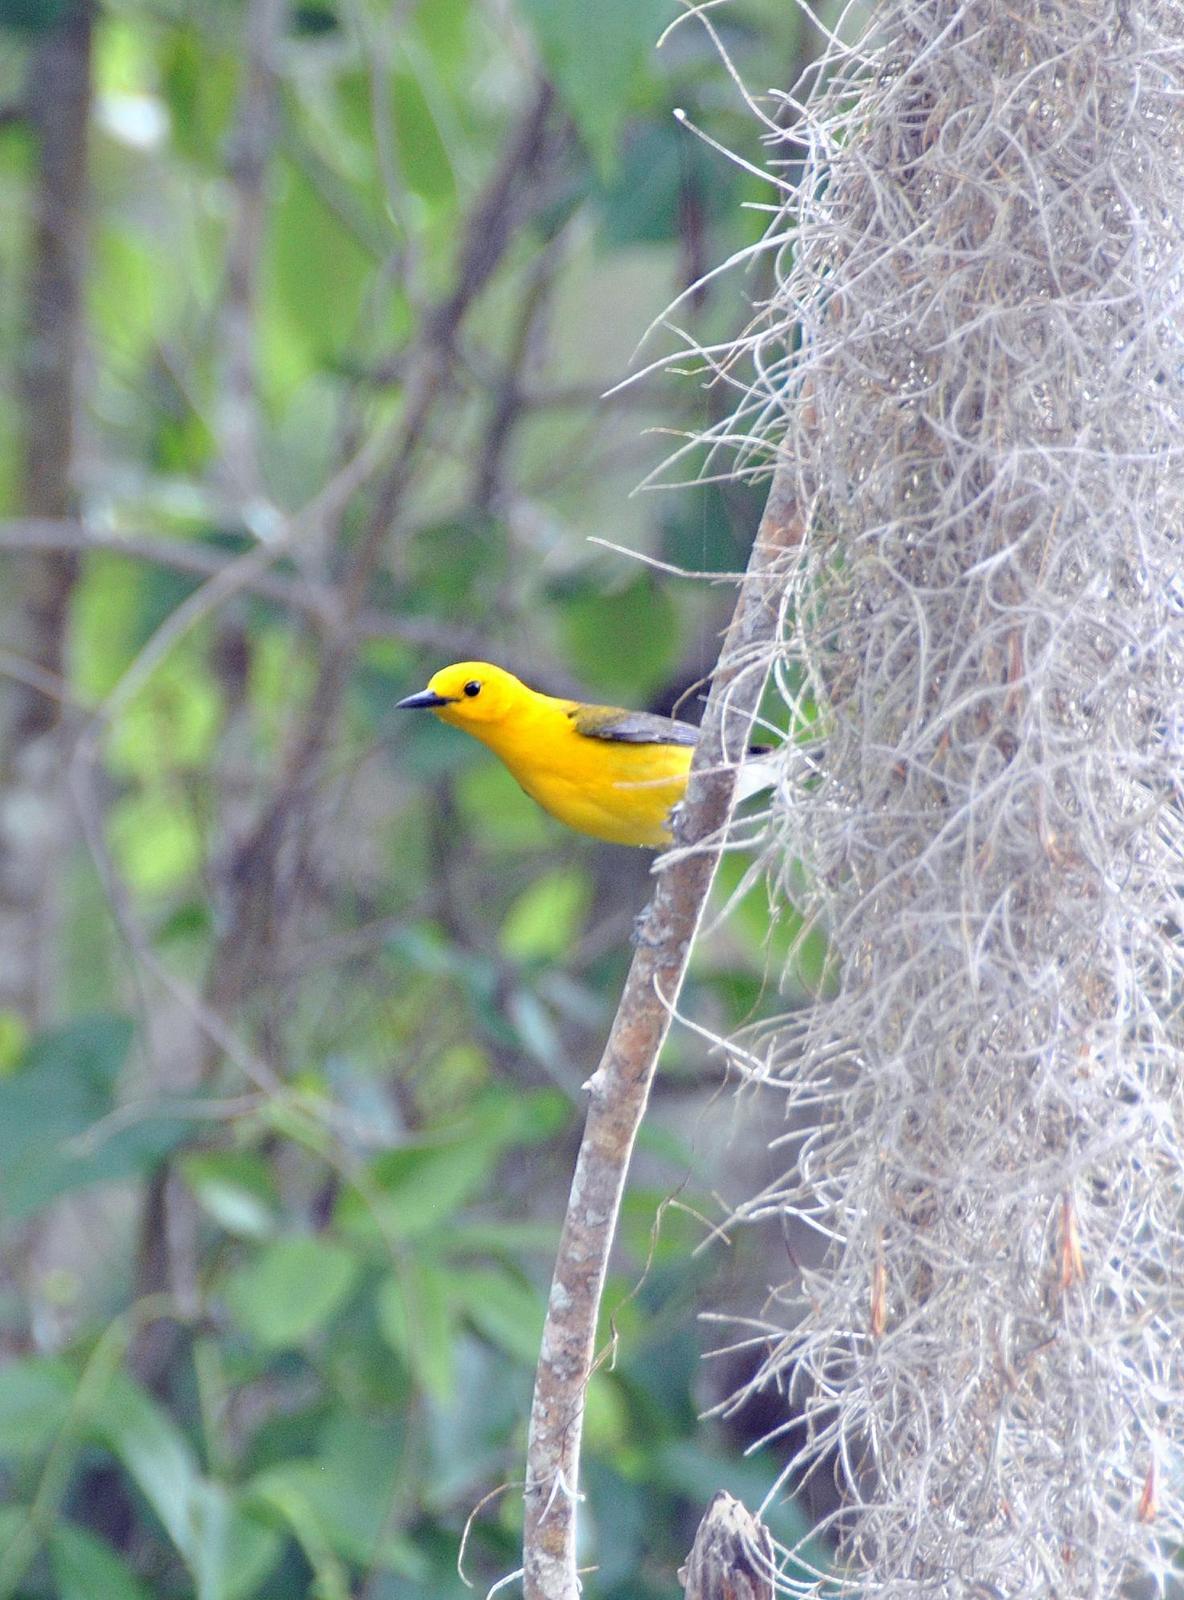 Prothonotary Warbler Photo by Carol Foil